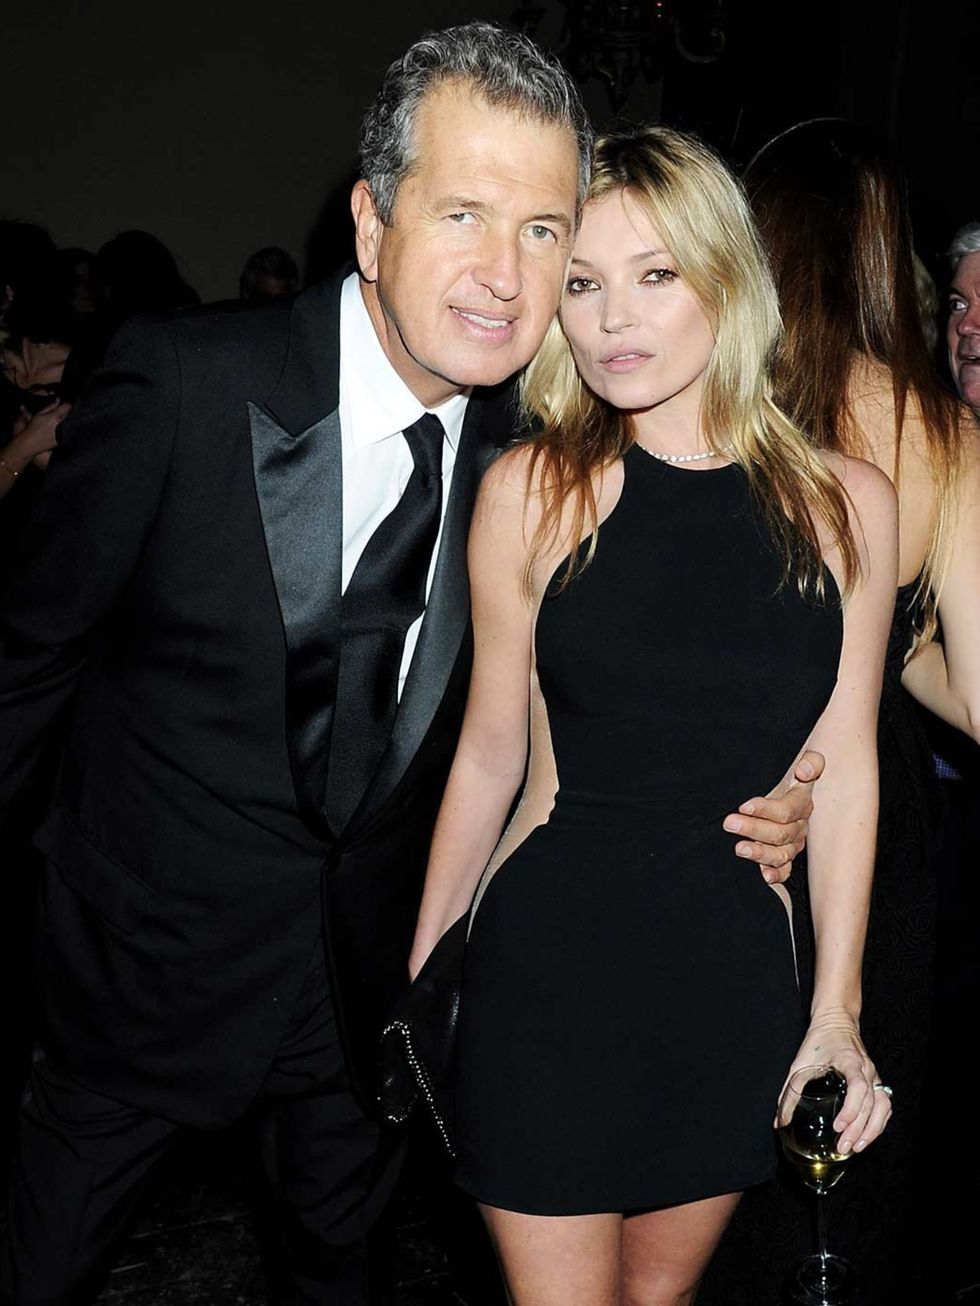 <p><a href="http://www.elleuk.com/content/search?SearchText=mario+testino&amp;SearchButto">Mario Testino</a> &amp; <a href="http://www.elleuk.com/star-style/celebrity-style-files/kate-moss">Kate Moss</a> at Stella McCartneys autumn/winter 2012 eveningwea